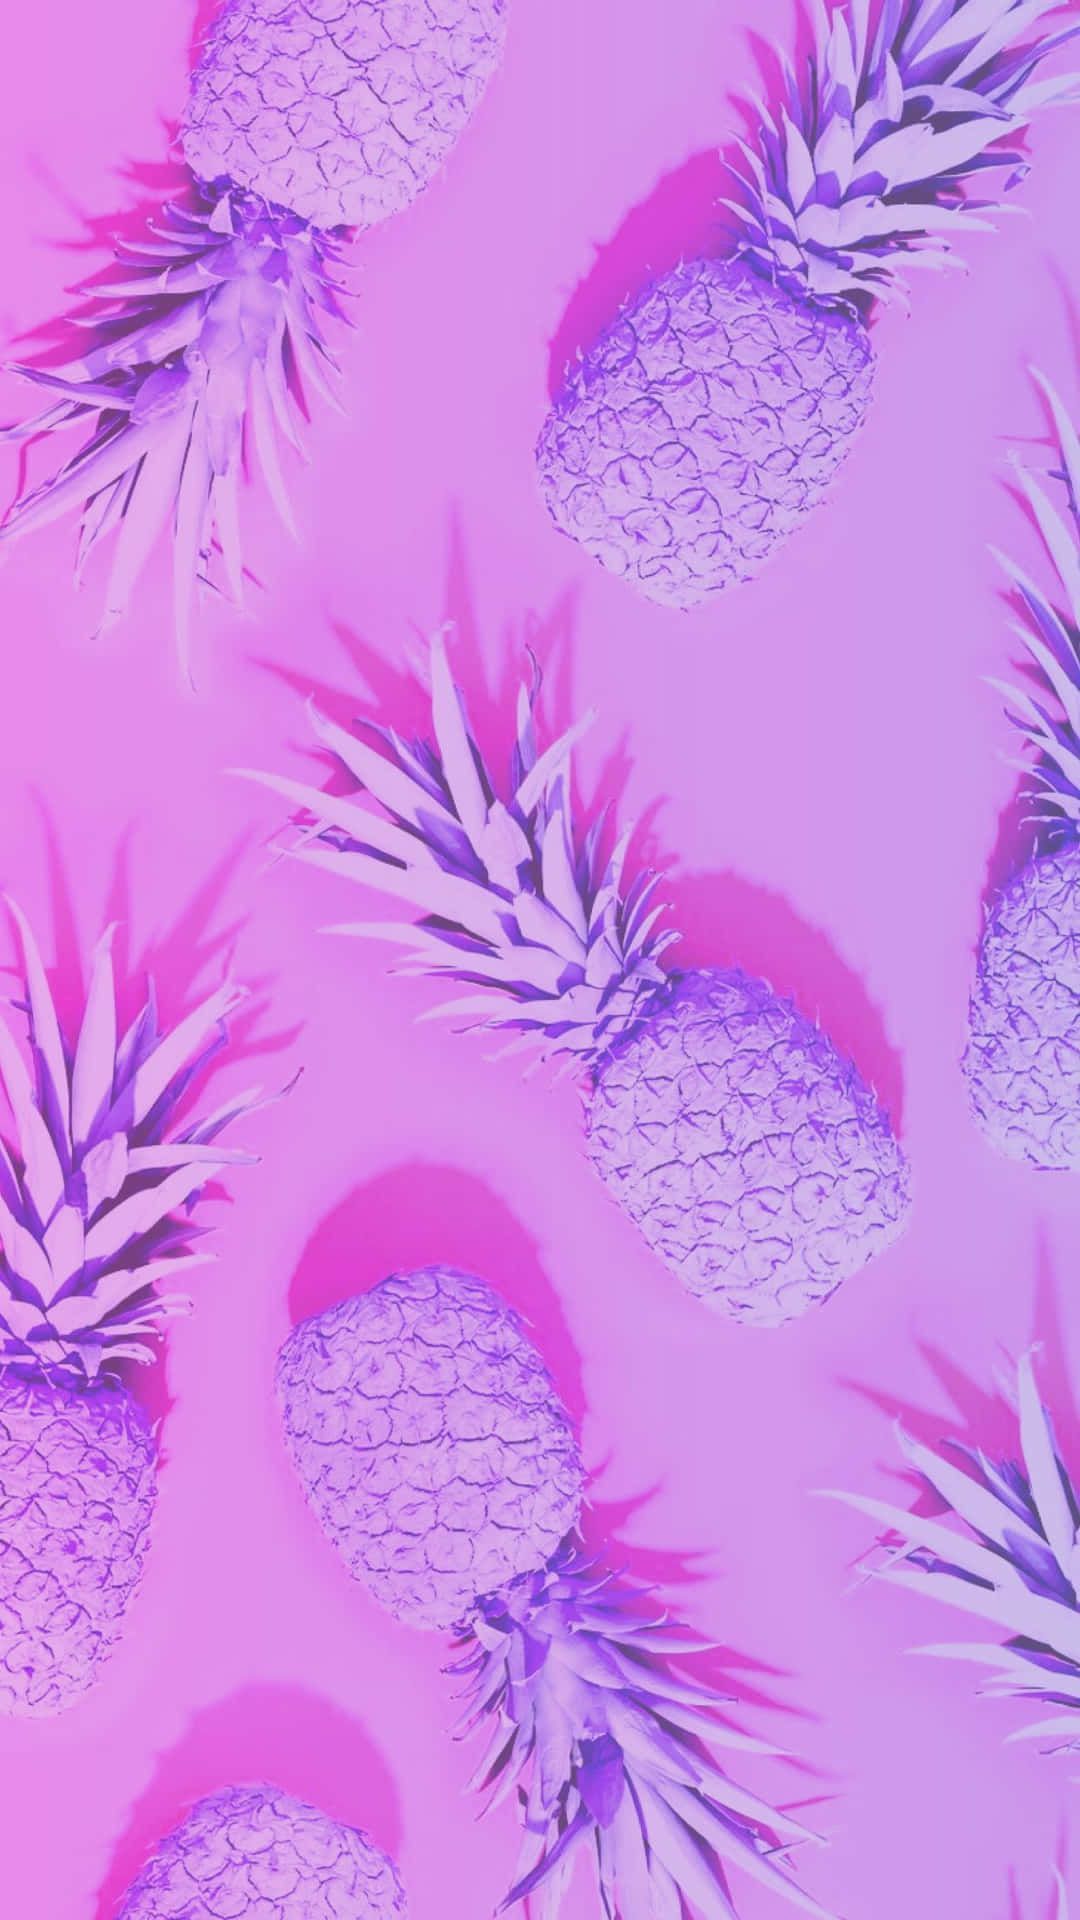 Pineapple wallpaper for phone with purple aesthetic. - Pineapple